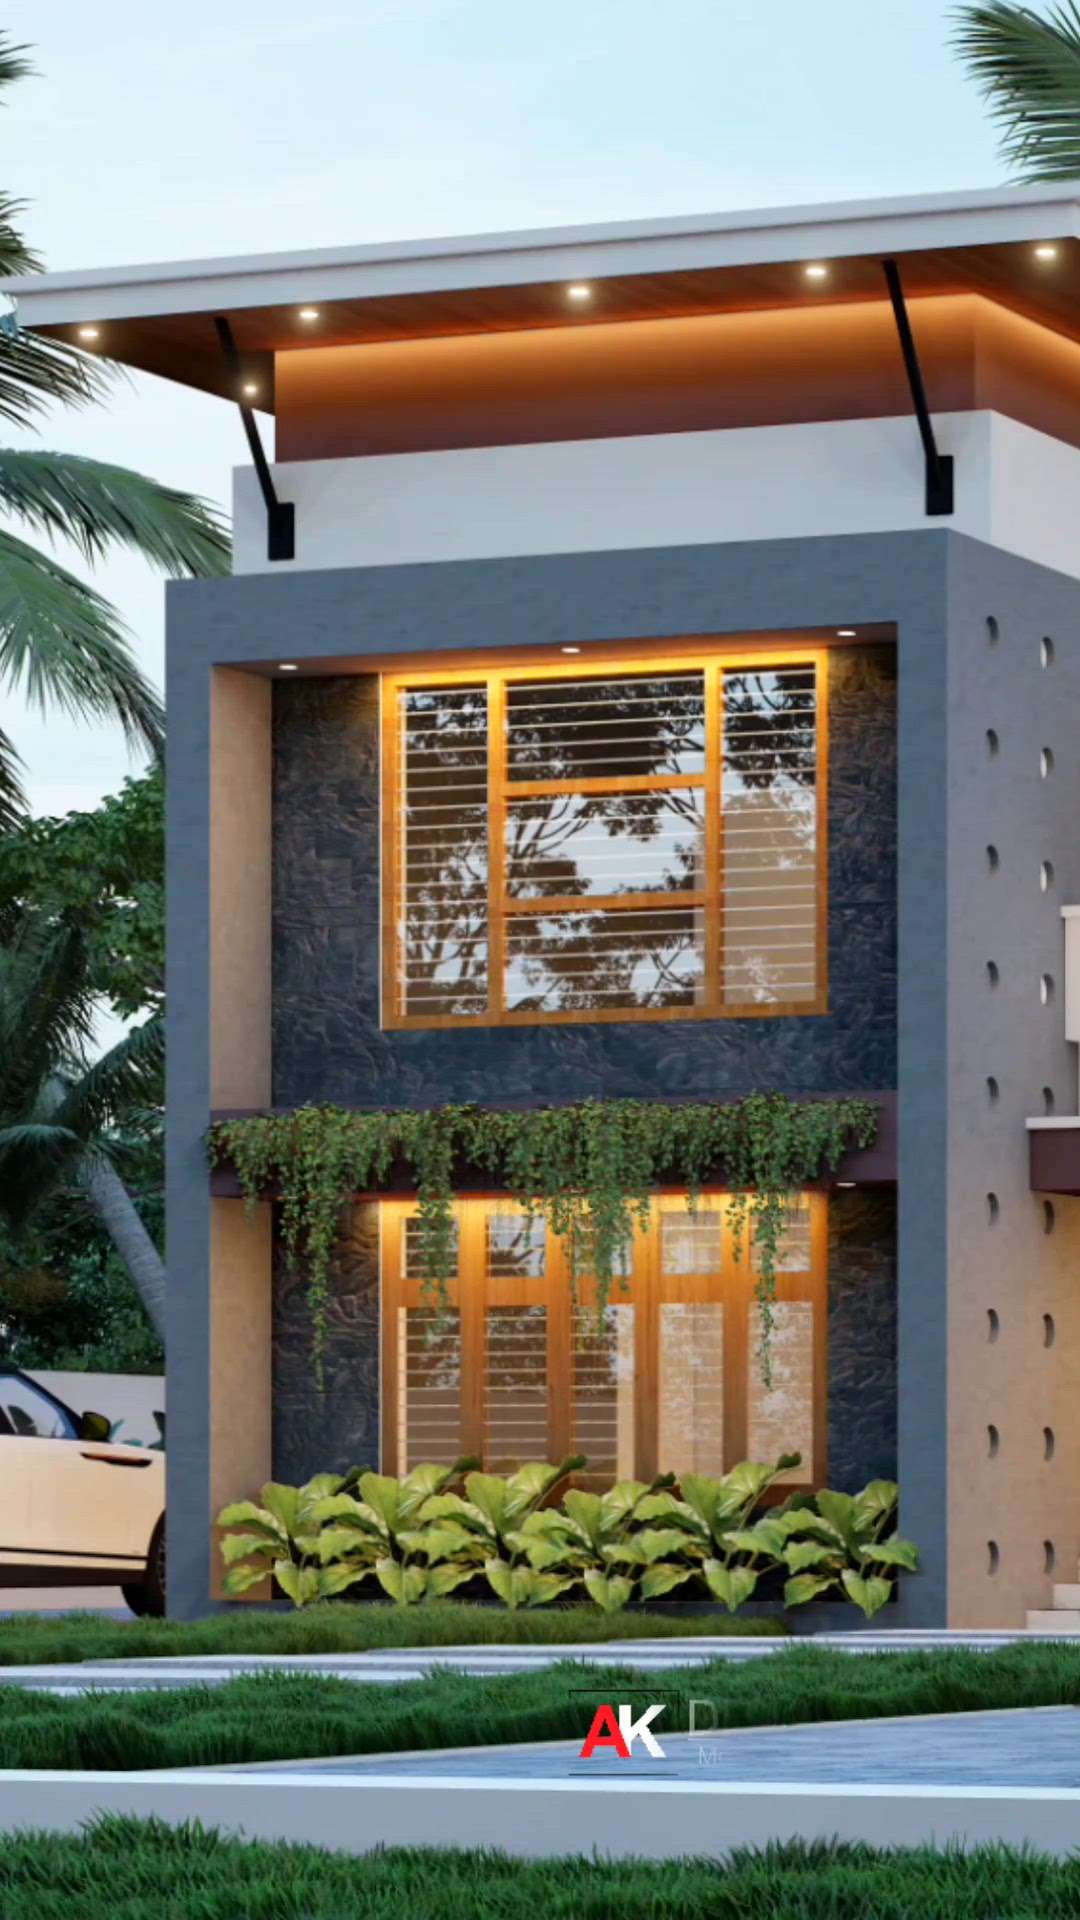 🏠 plan & Exterior view....
Area __ 2670sq
4bhk
client _ Rahiman


Contact: 7561858643

📍Dm Us For Any Design @ak_designz____

Contact me on whatsapp
📞7561858643

#designer_767 #house #housedesign #housedesigns #residentionaldesign #homedesign #residentialdesign #residential #civilengineering #autocad #3ddesign #arcdaily #architecture #architecturedesign #architectural #keralahome
#house3d #keralahomes #keralahomestyle #KeralaStyleHouse #keralastyle #ElevationHome #houseplan #4BHKPlans #homeplan #newplan #ContemporaryDesigns #ContemporaryHouse #semi_contemporary_home_design #homedesigne #HouseDesigns 
@kolo.kerala @archidesign.kerala @archdaily#3dvideo# #design3dvideo